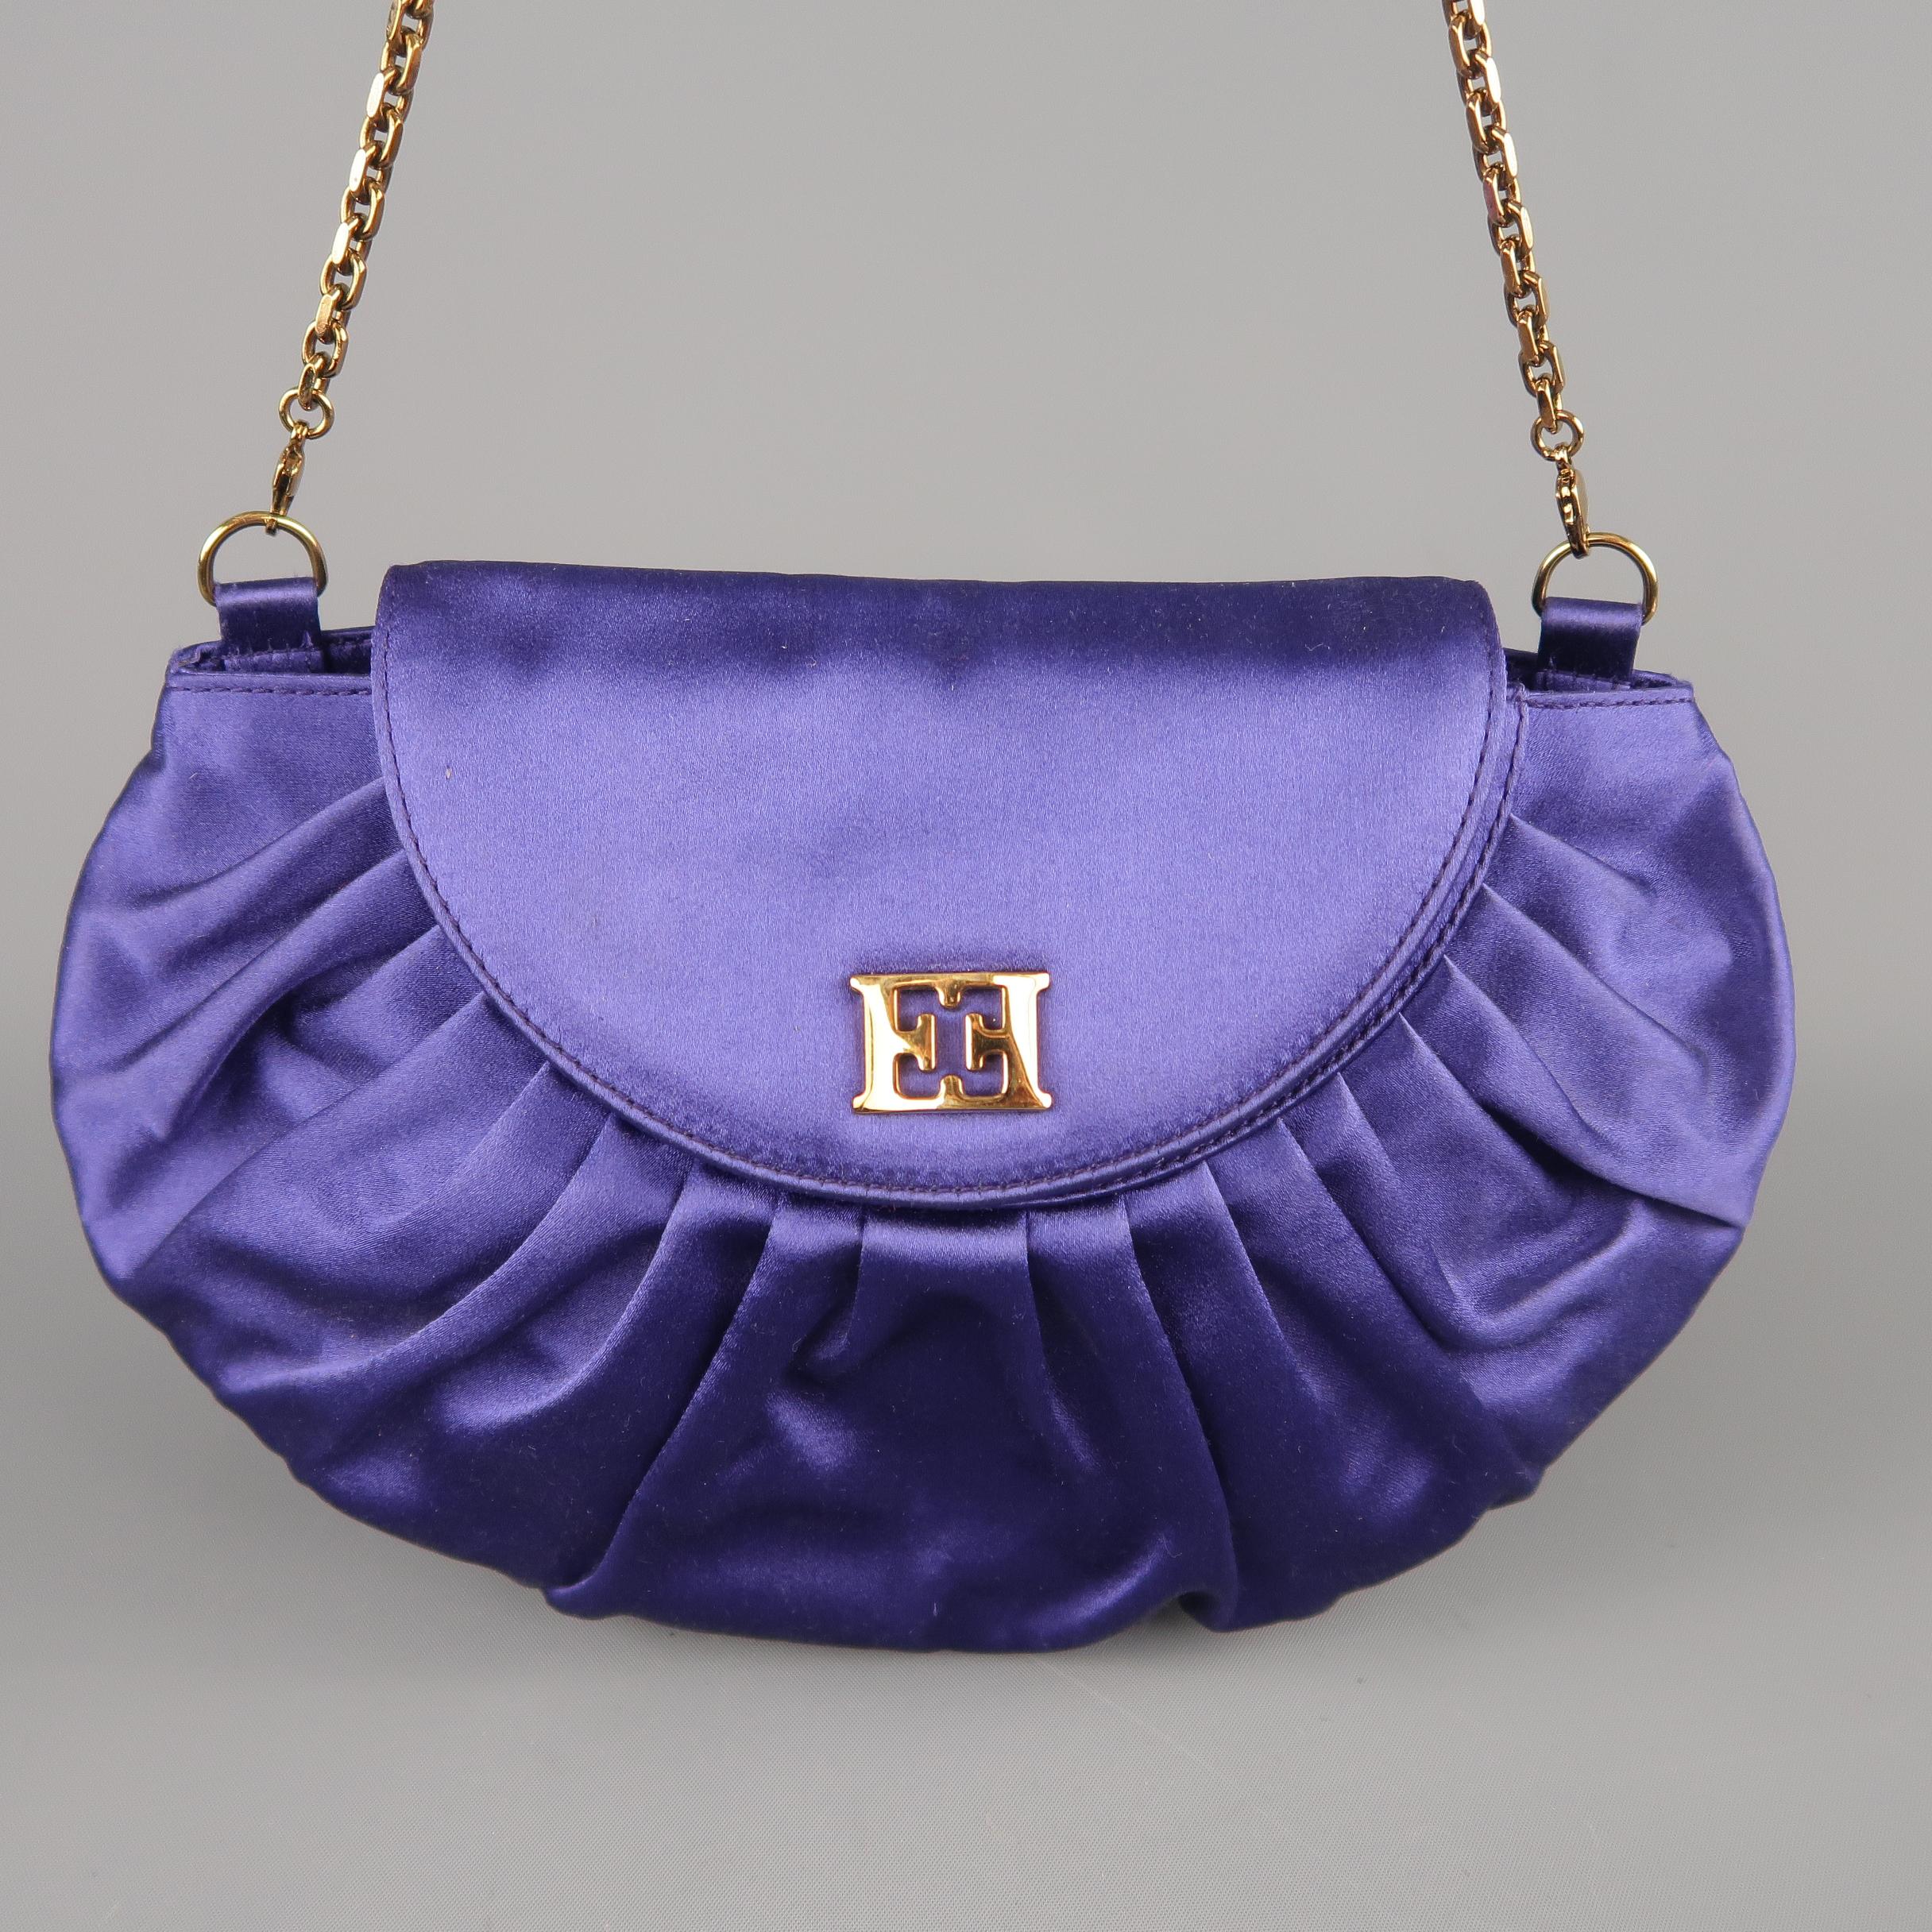 ESCADA evening bag comes in purple silk satin with a pleated body flap snap closure with gold tone metal EE logo and detachable chain strap. Wear on interior. Made in Italy.
 
Good Pre-Owned Condition.
 
Measurements:
 
Length: 9.5 in.
Width: 1.5